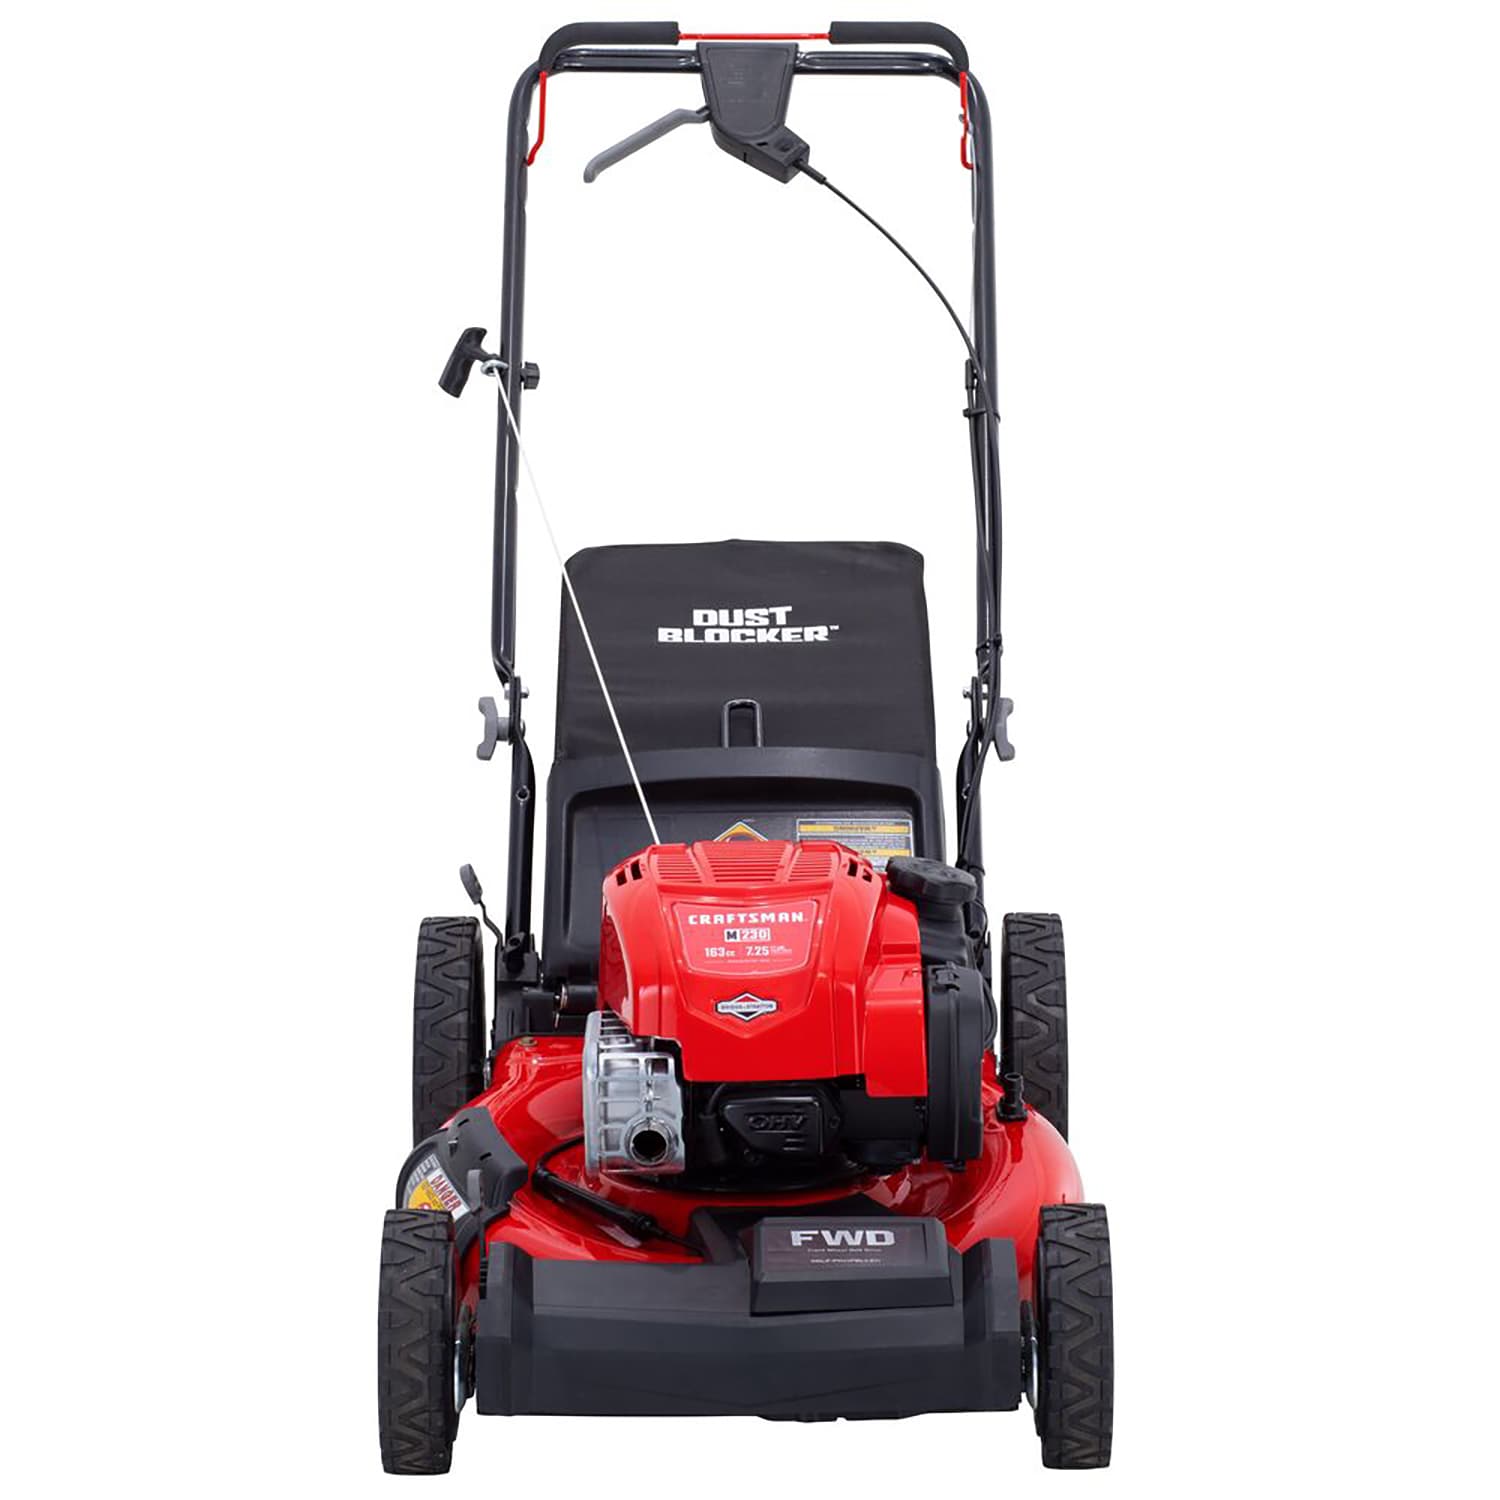 CRAFTSMAN M230 163-cc 21-in Gas Self-propelled Lawn Mower with